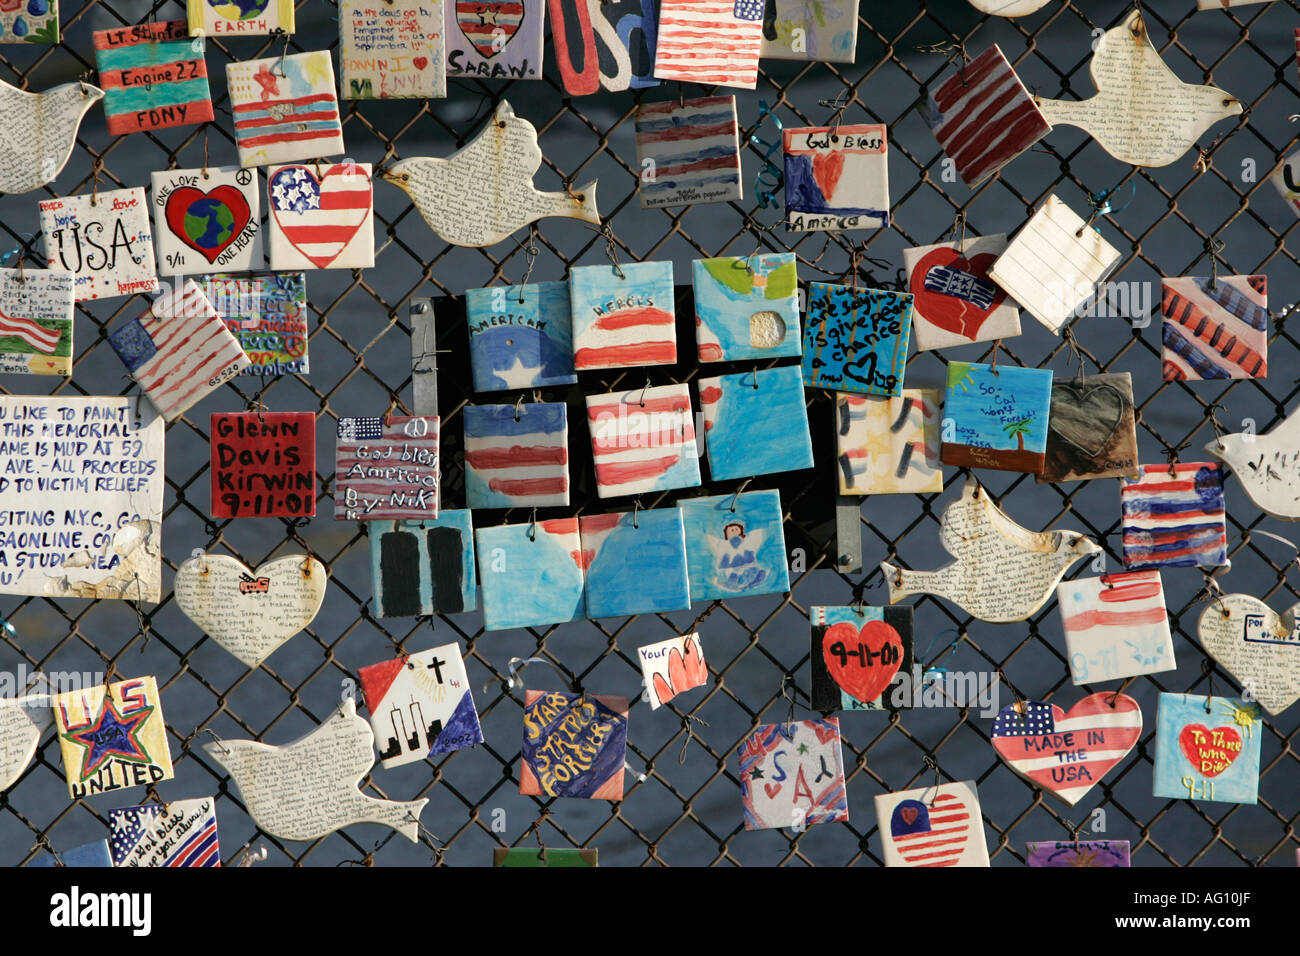 9 11 tile memorial tiles made by american children and displayed on fence on 7th avenue new york city new york USA Stock Photo